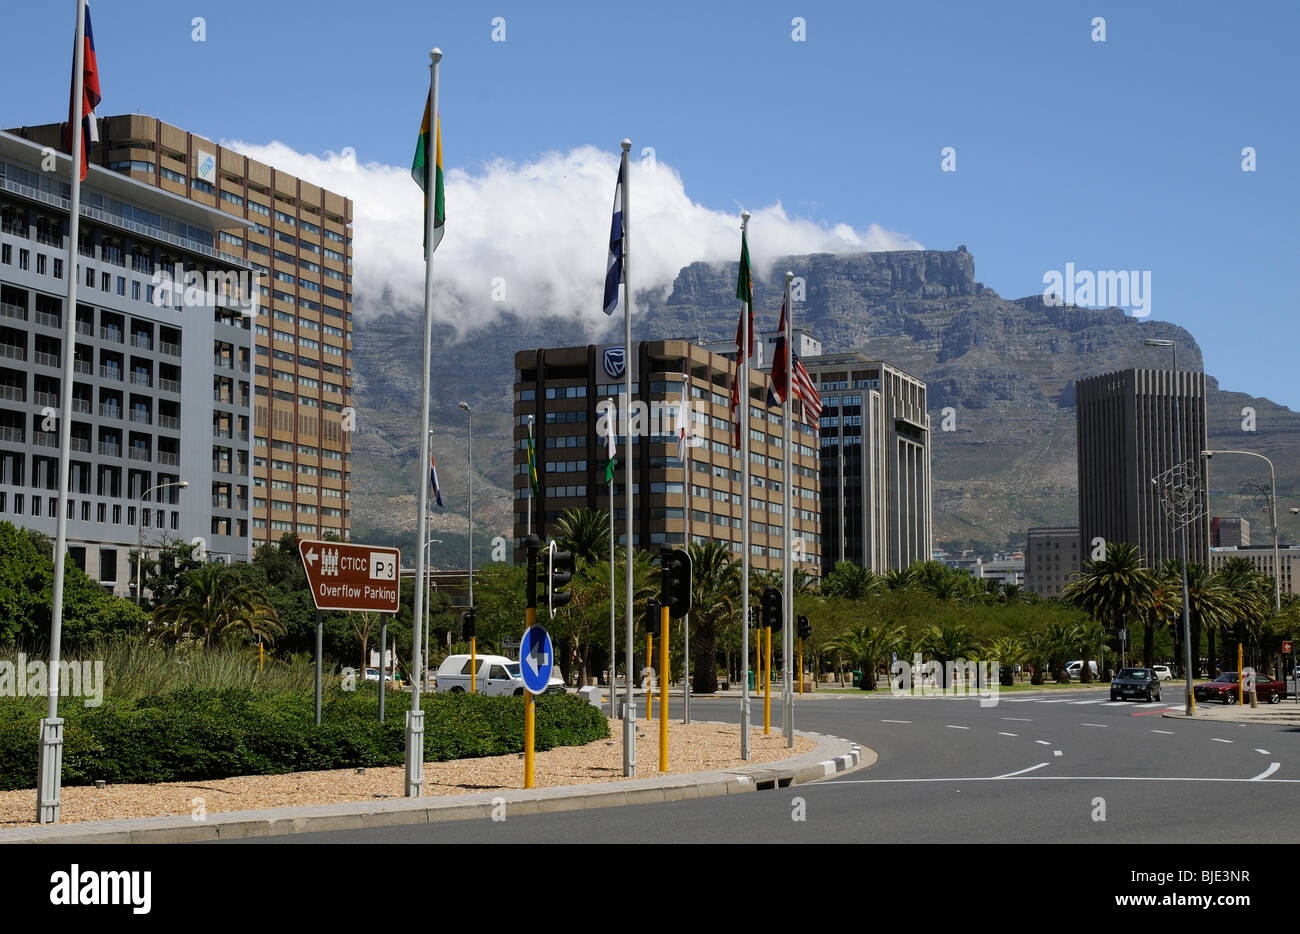 Table Mountain with cloud gathering overlooks the office premises along Adderley Street in Cape Town's city centre. South Africa Stock Photo